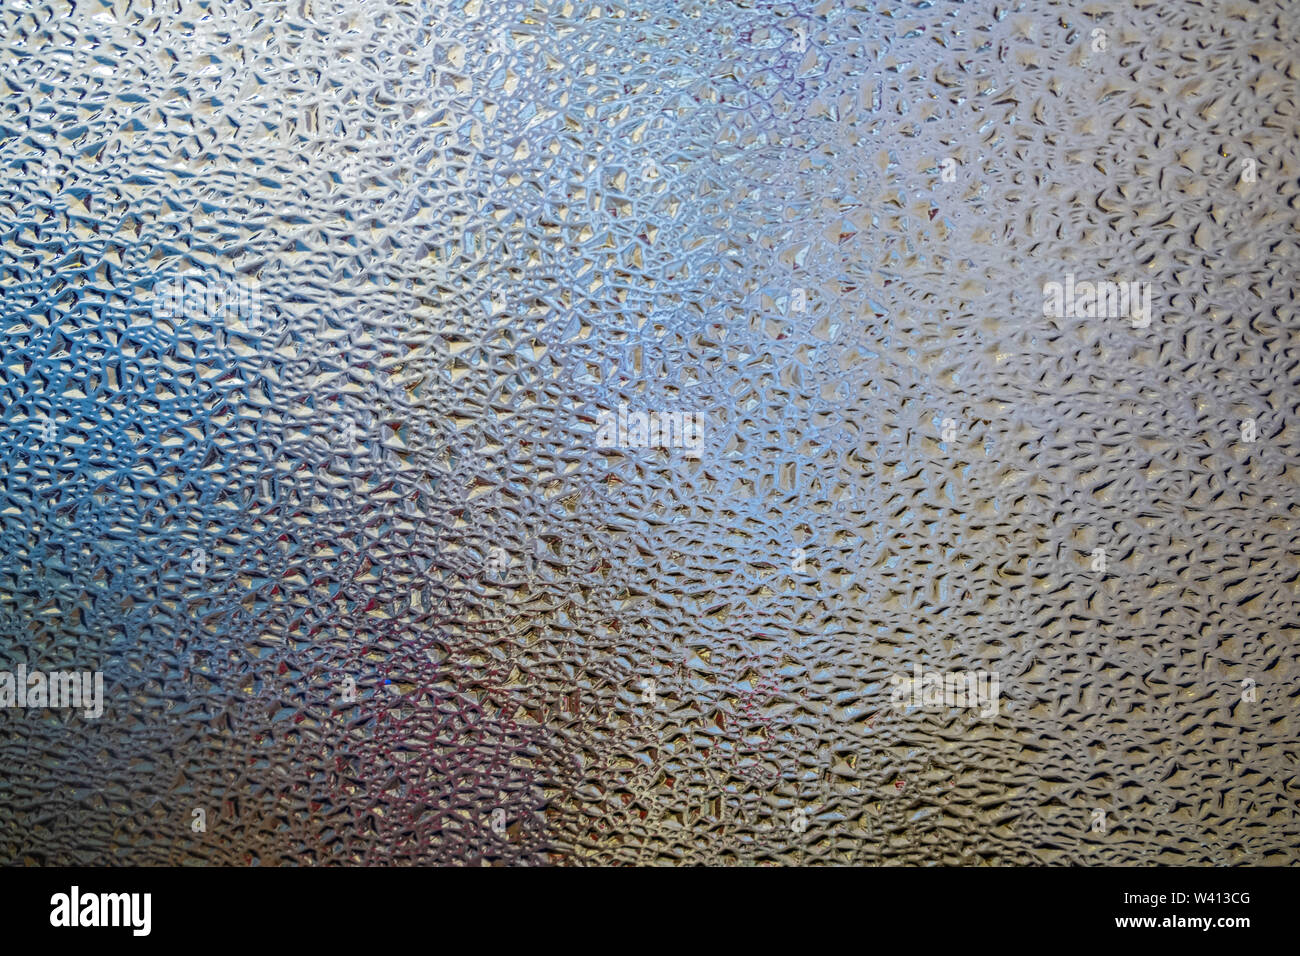 Privacy glass with intricate texture for backgrounds and overlays Stock Photo